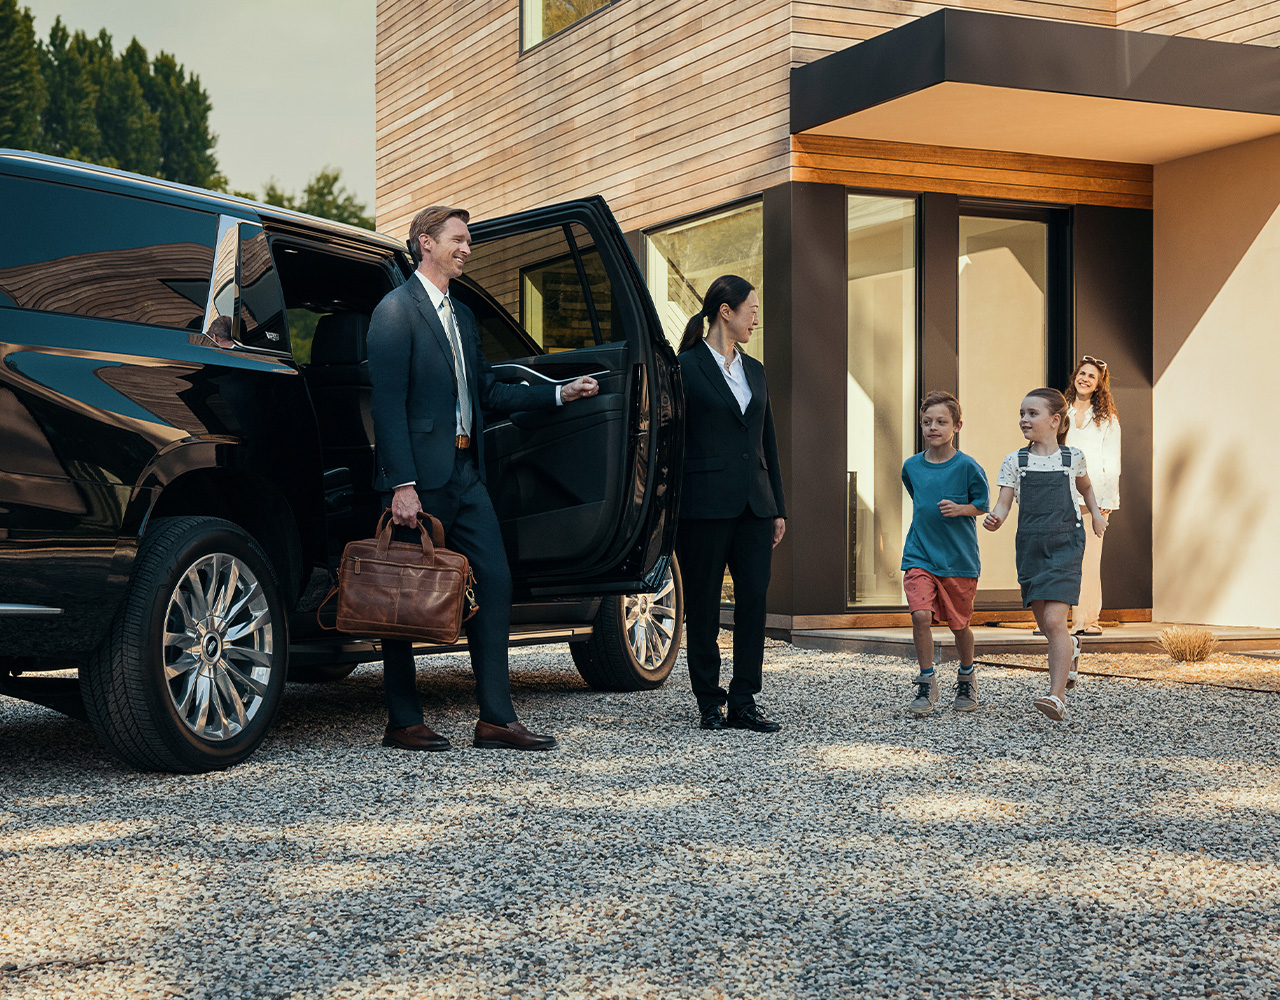 As a chauffeur opens the door, a man leaves his car to be greeted by his waiting children.